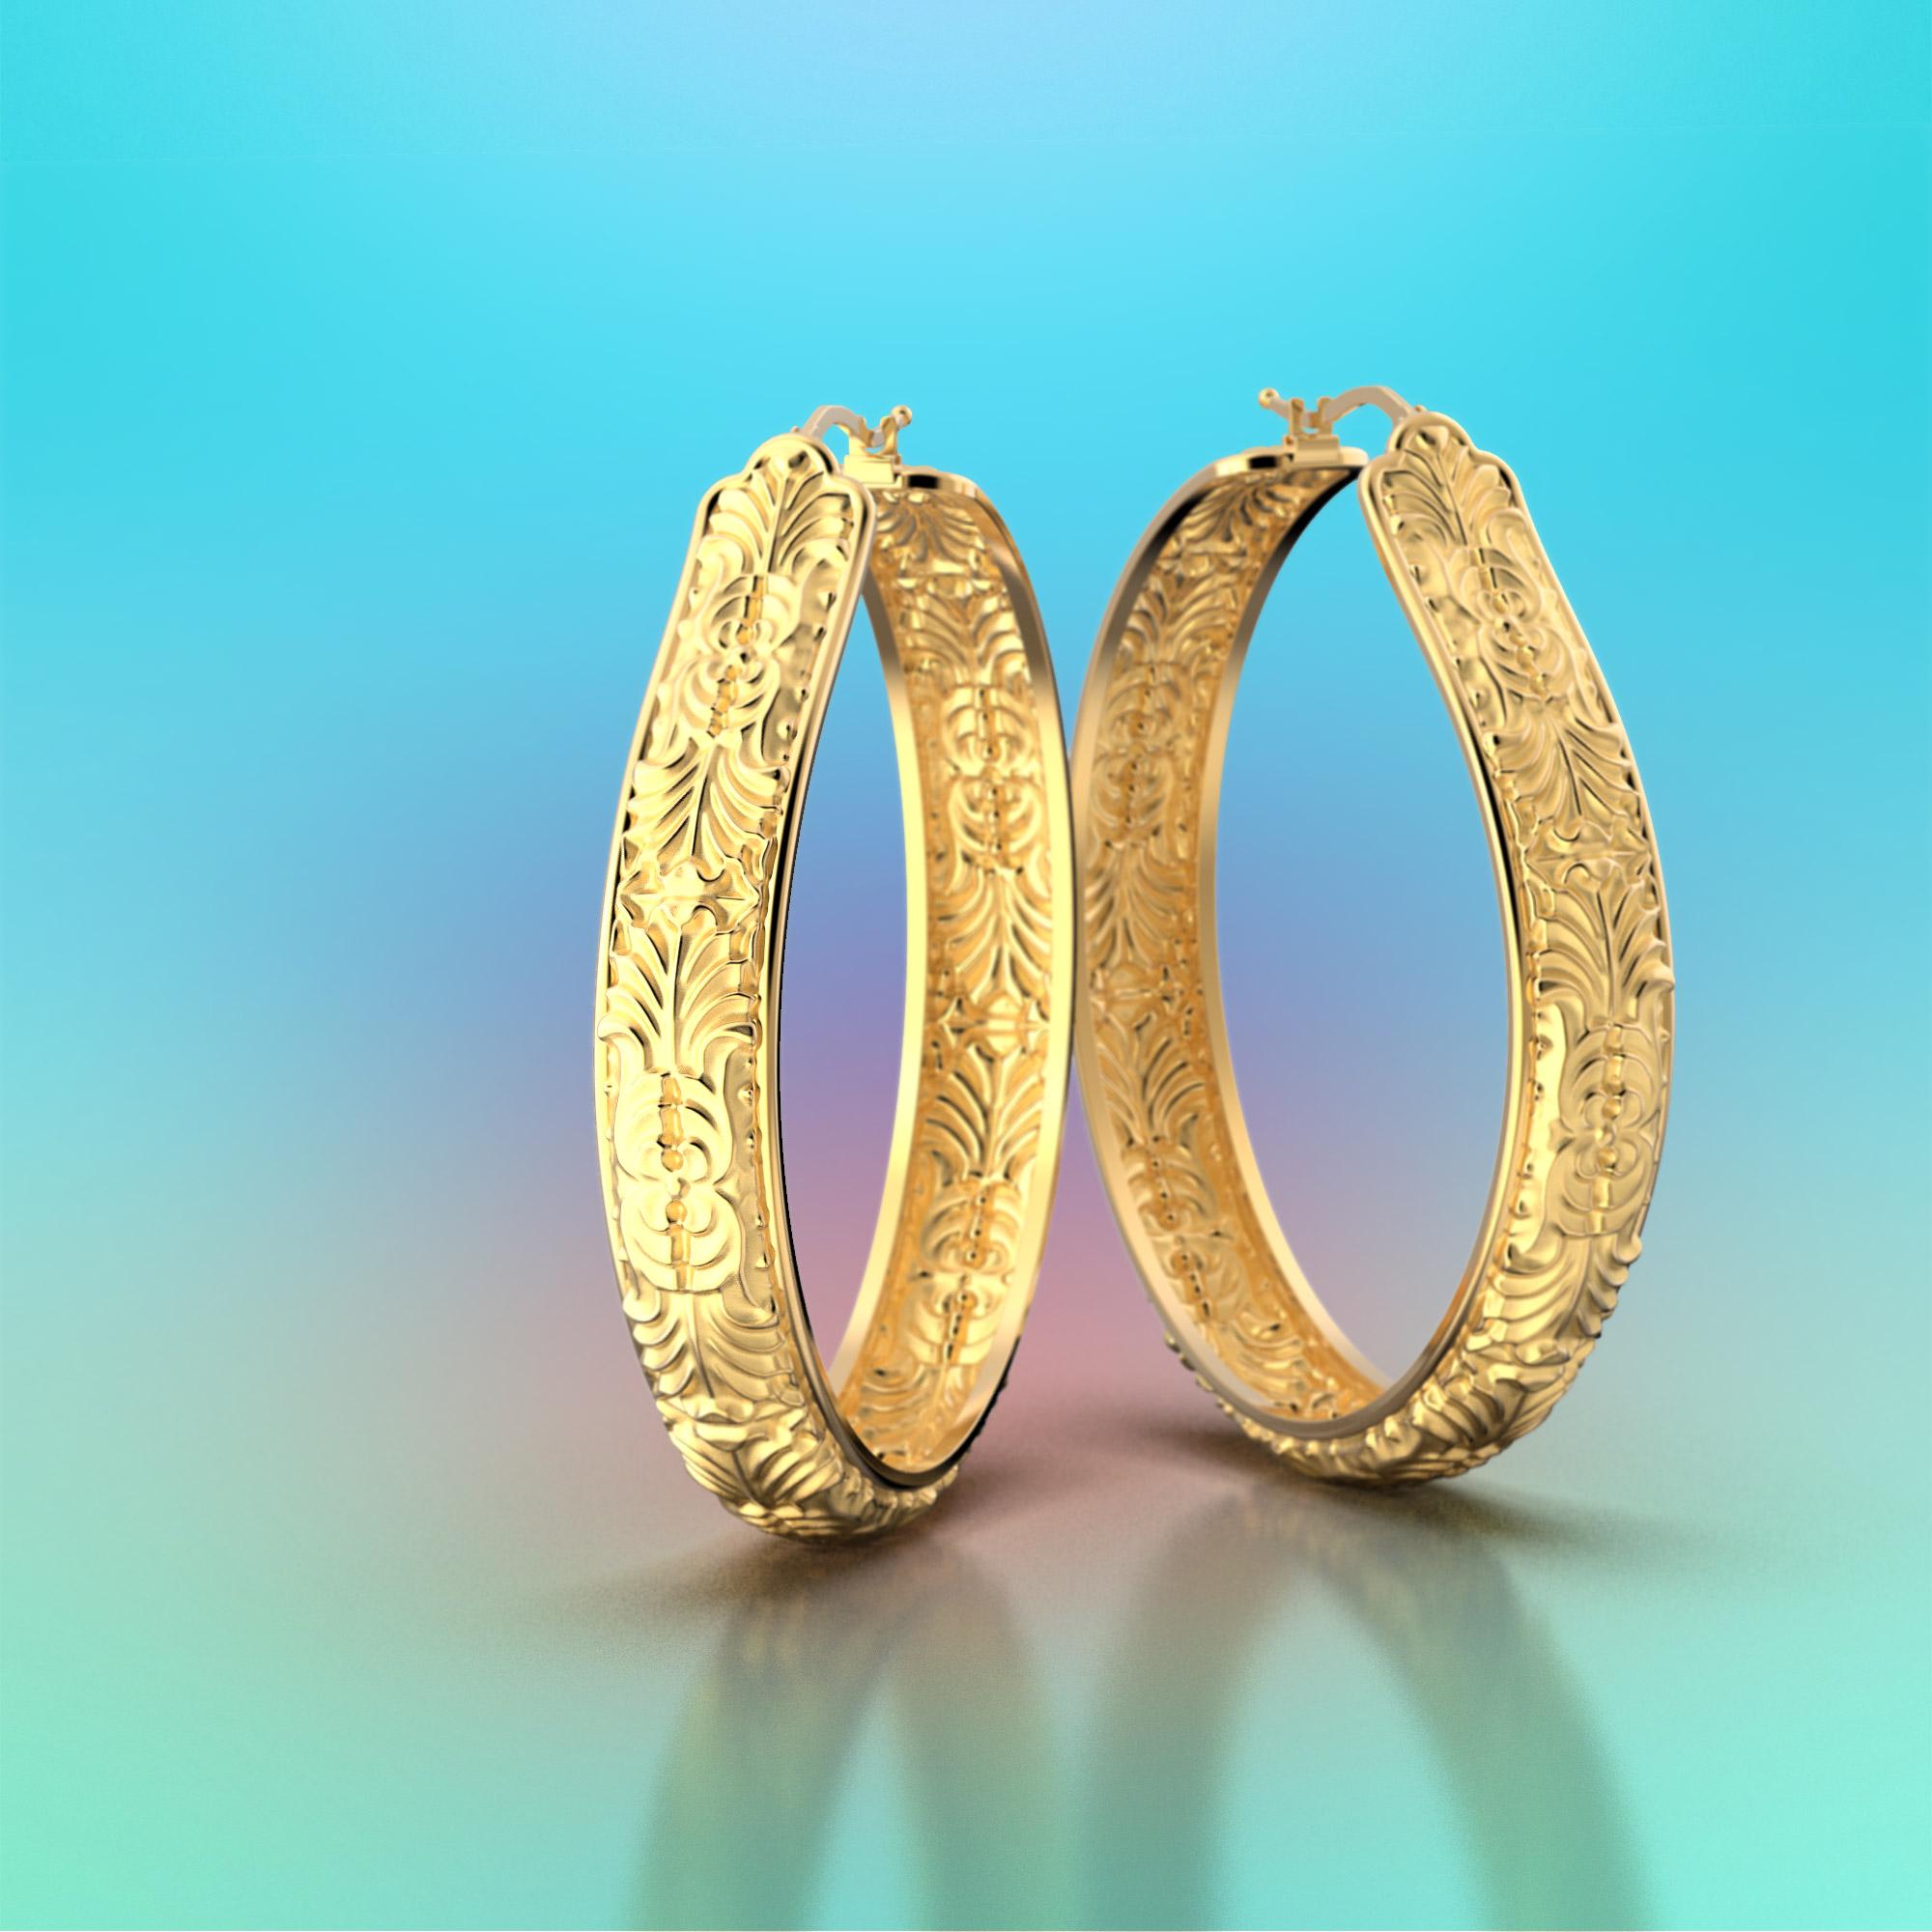 Made to Order Stunning 18k Gold Hoop Earrings.
Size : 51 mm diameter x 9 mm large
Introducing a true embodiment of opulence and elegance – the Made in Italy Acanthus Leaf Hoop Earrings, available exclusively in exquisite 18k and 14k solid gold.